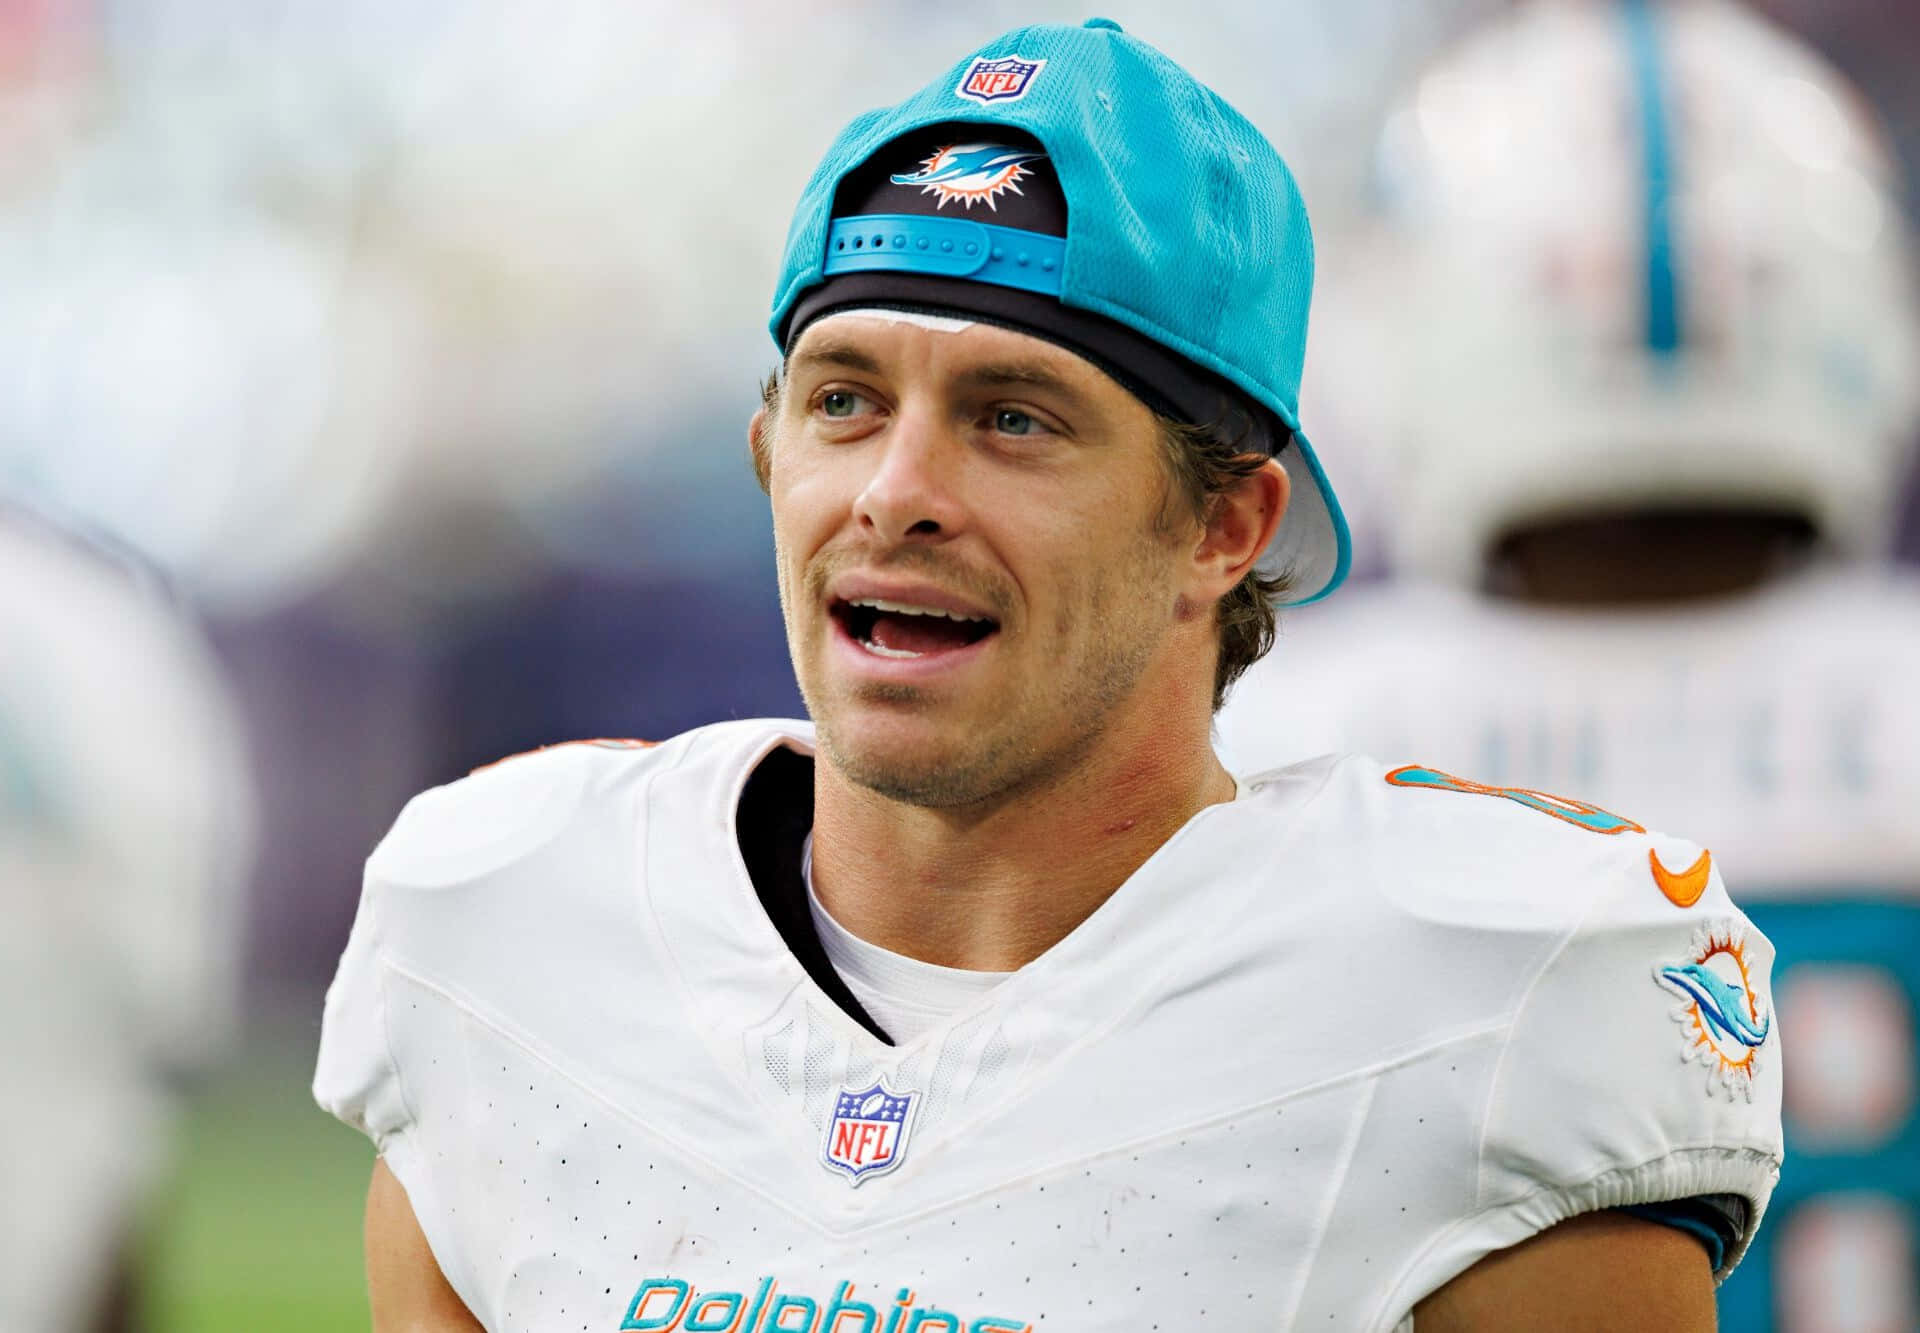 Miami Dolphins Player Sideline Candid Wallpaper